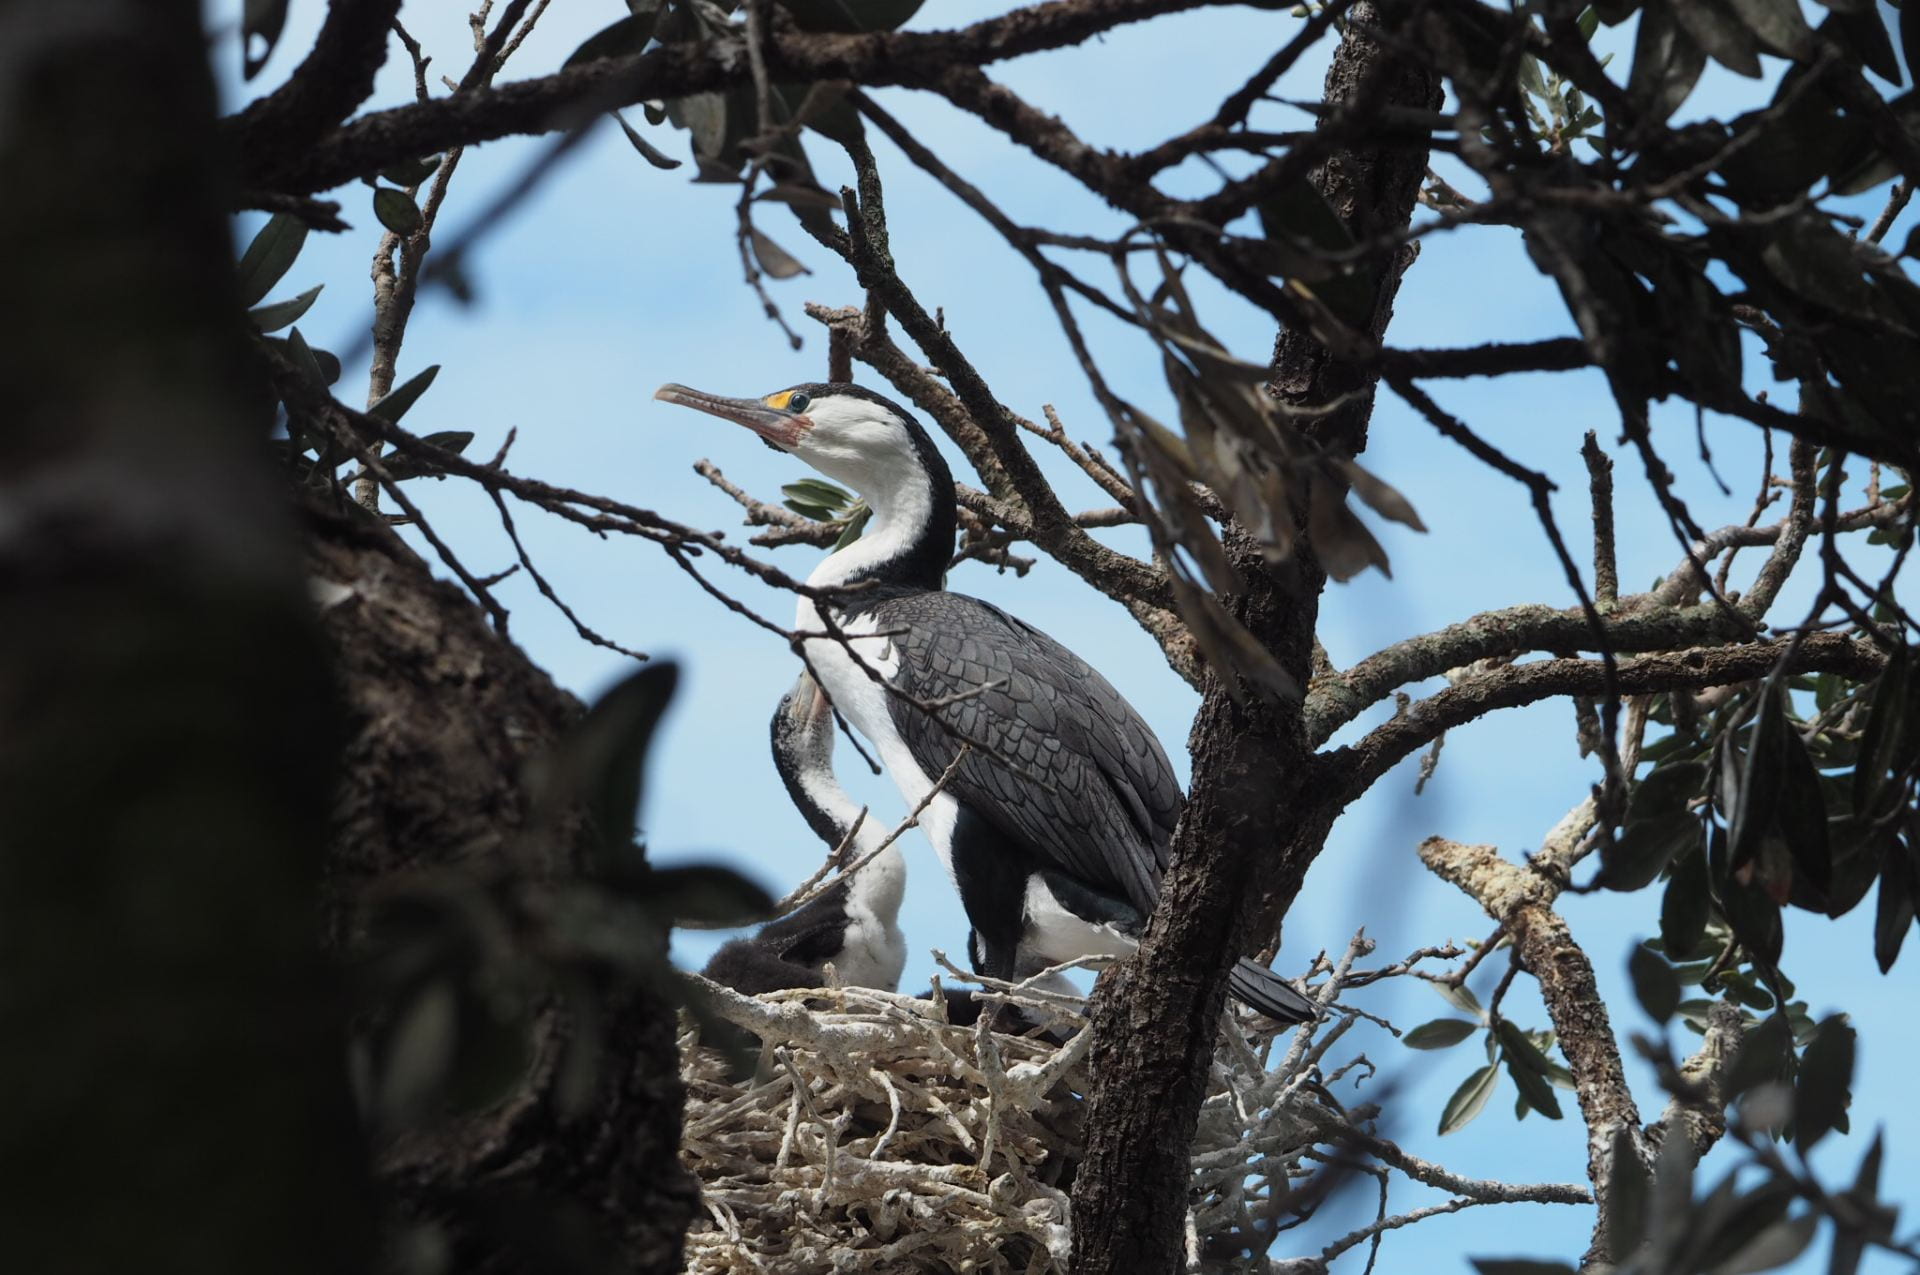 Pied shag parents and chick in a nest, viewed between branches